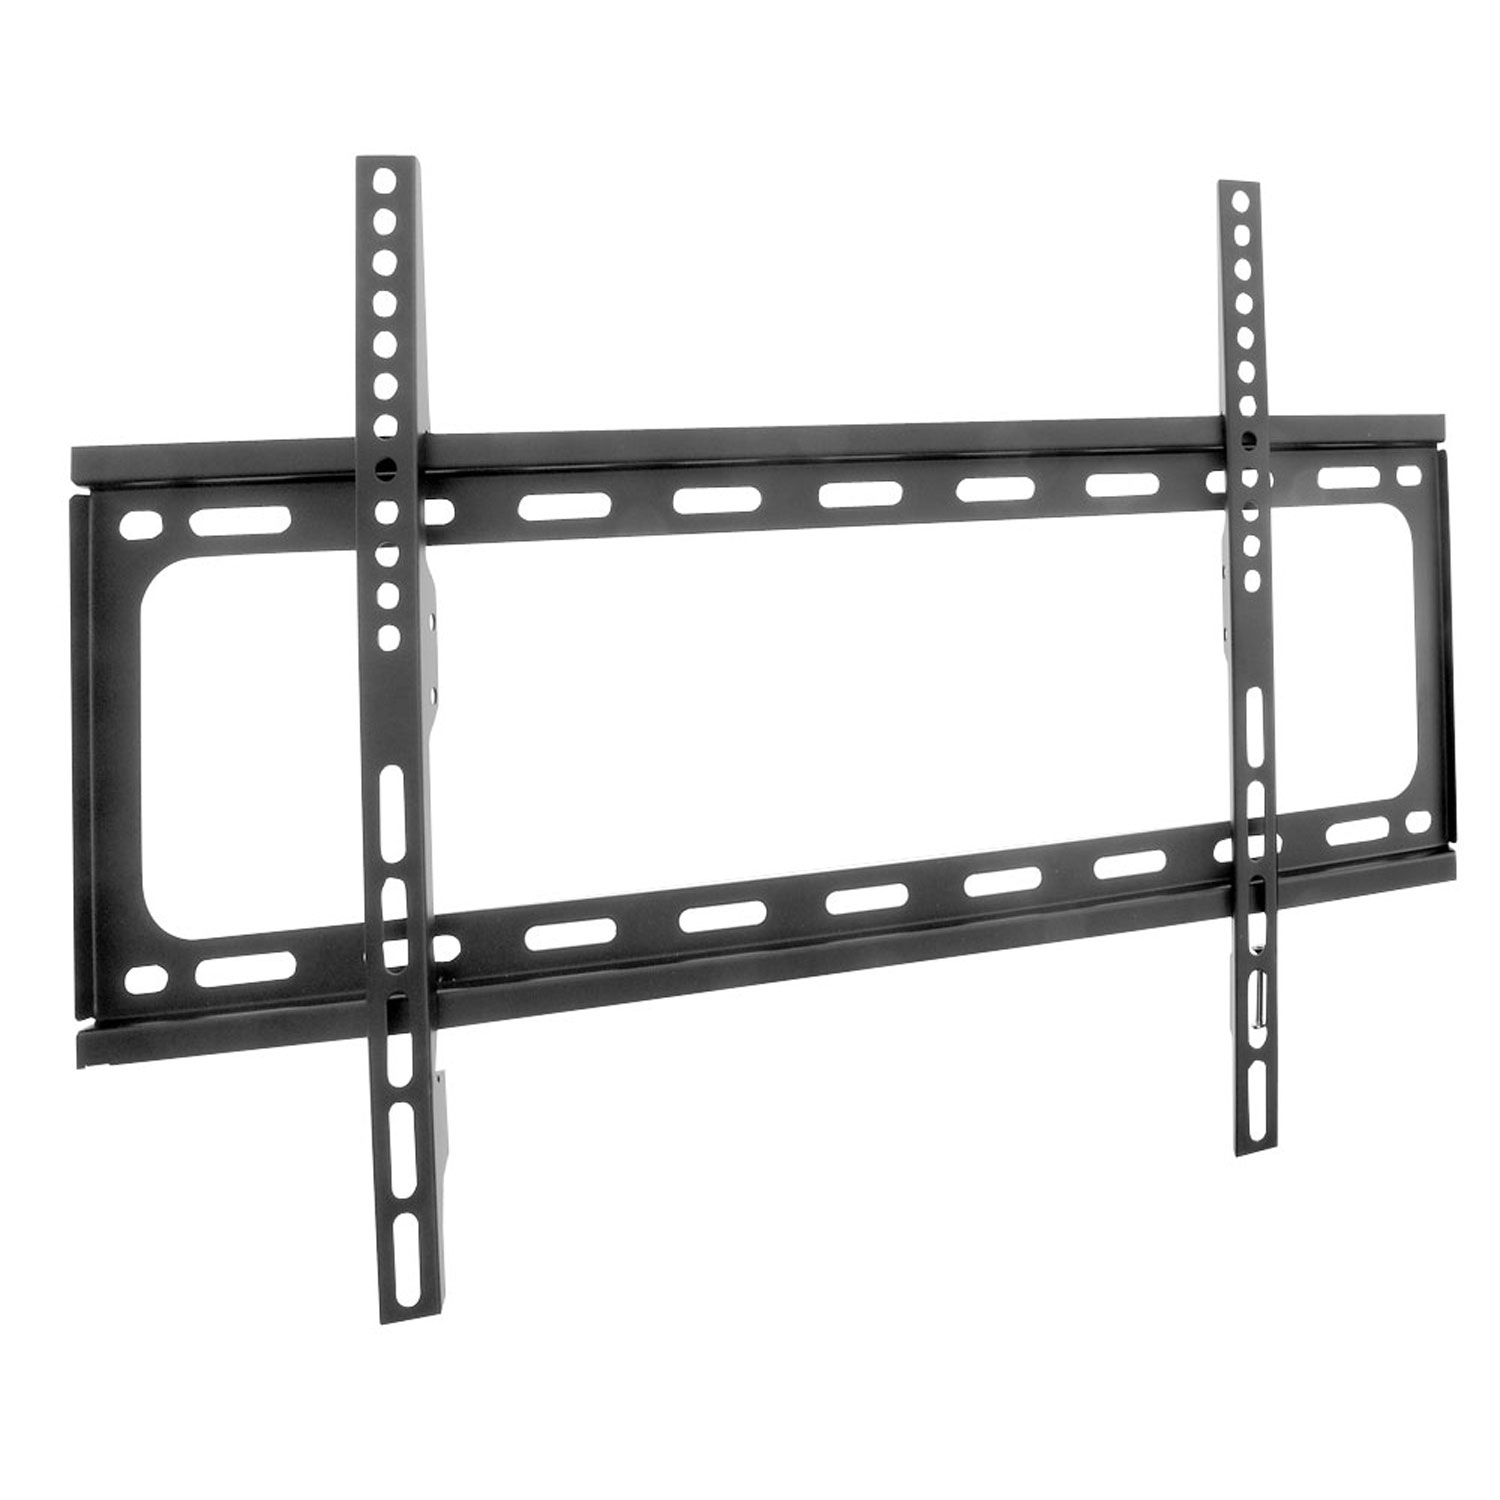 Pyle Universal TV Mount - fits virtually any 32" to 55" TVs including the latest Plasma, LED, LCD, 3D, Smart & other flat panel TVs - image 1 of 3